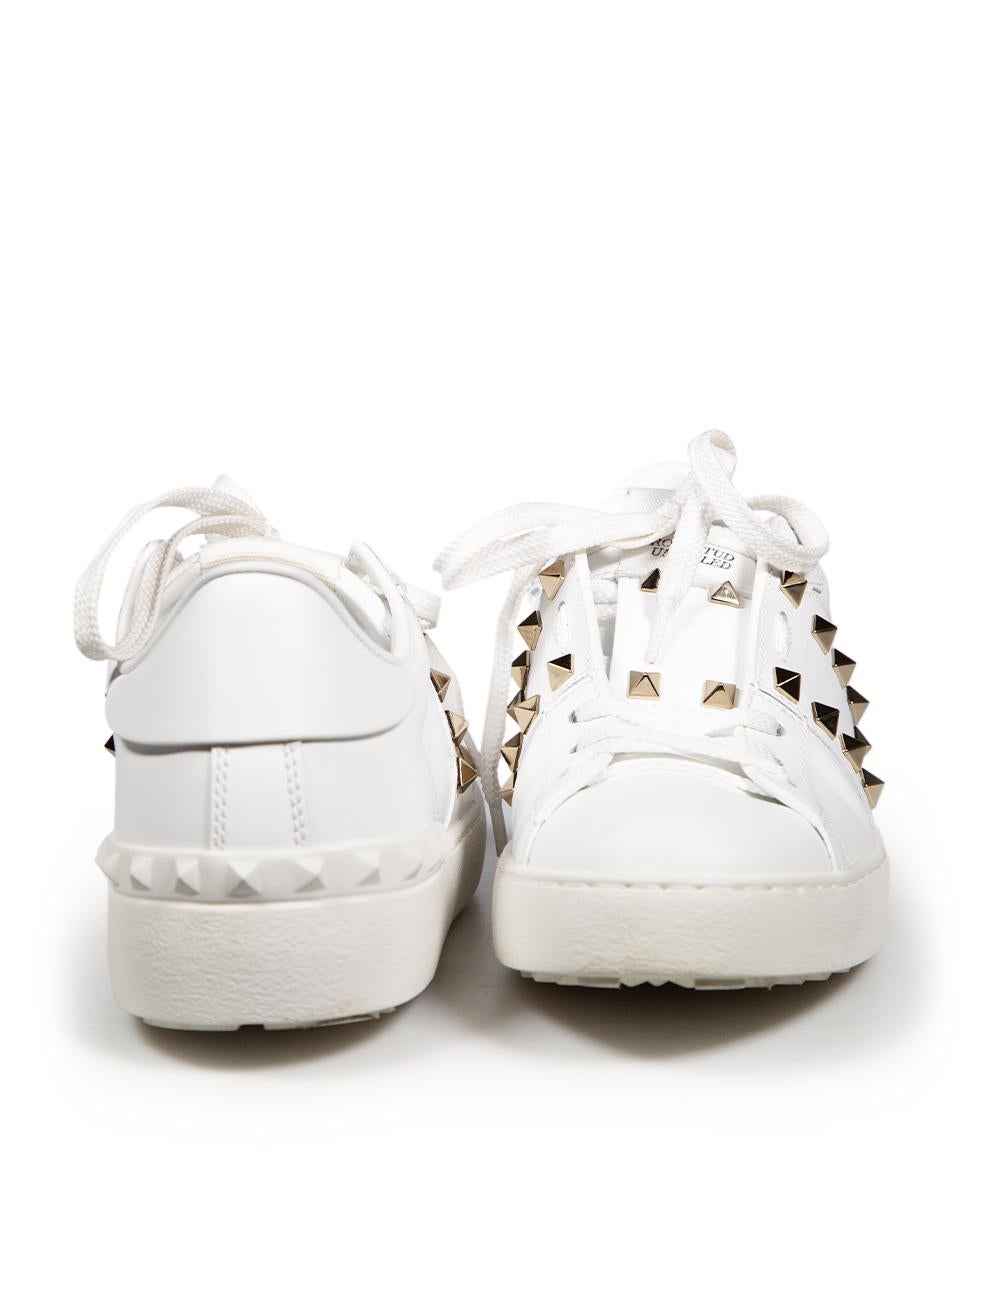 Valentino Garavani White Leather Rockstud Untitled Trainers Size IT 37 In Good Condition For Sale In London, GB